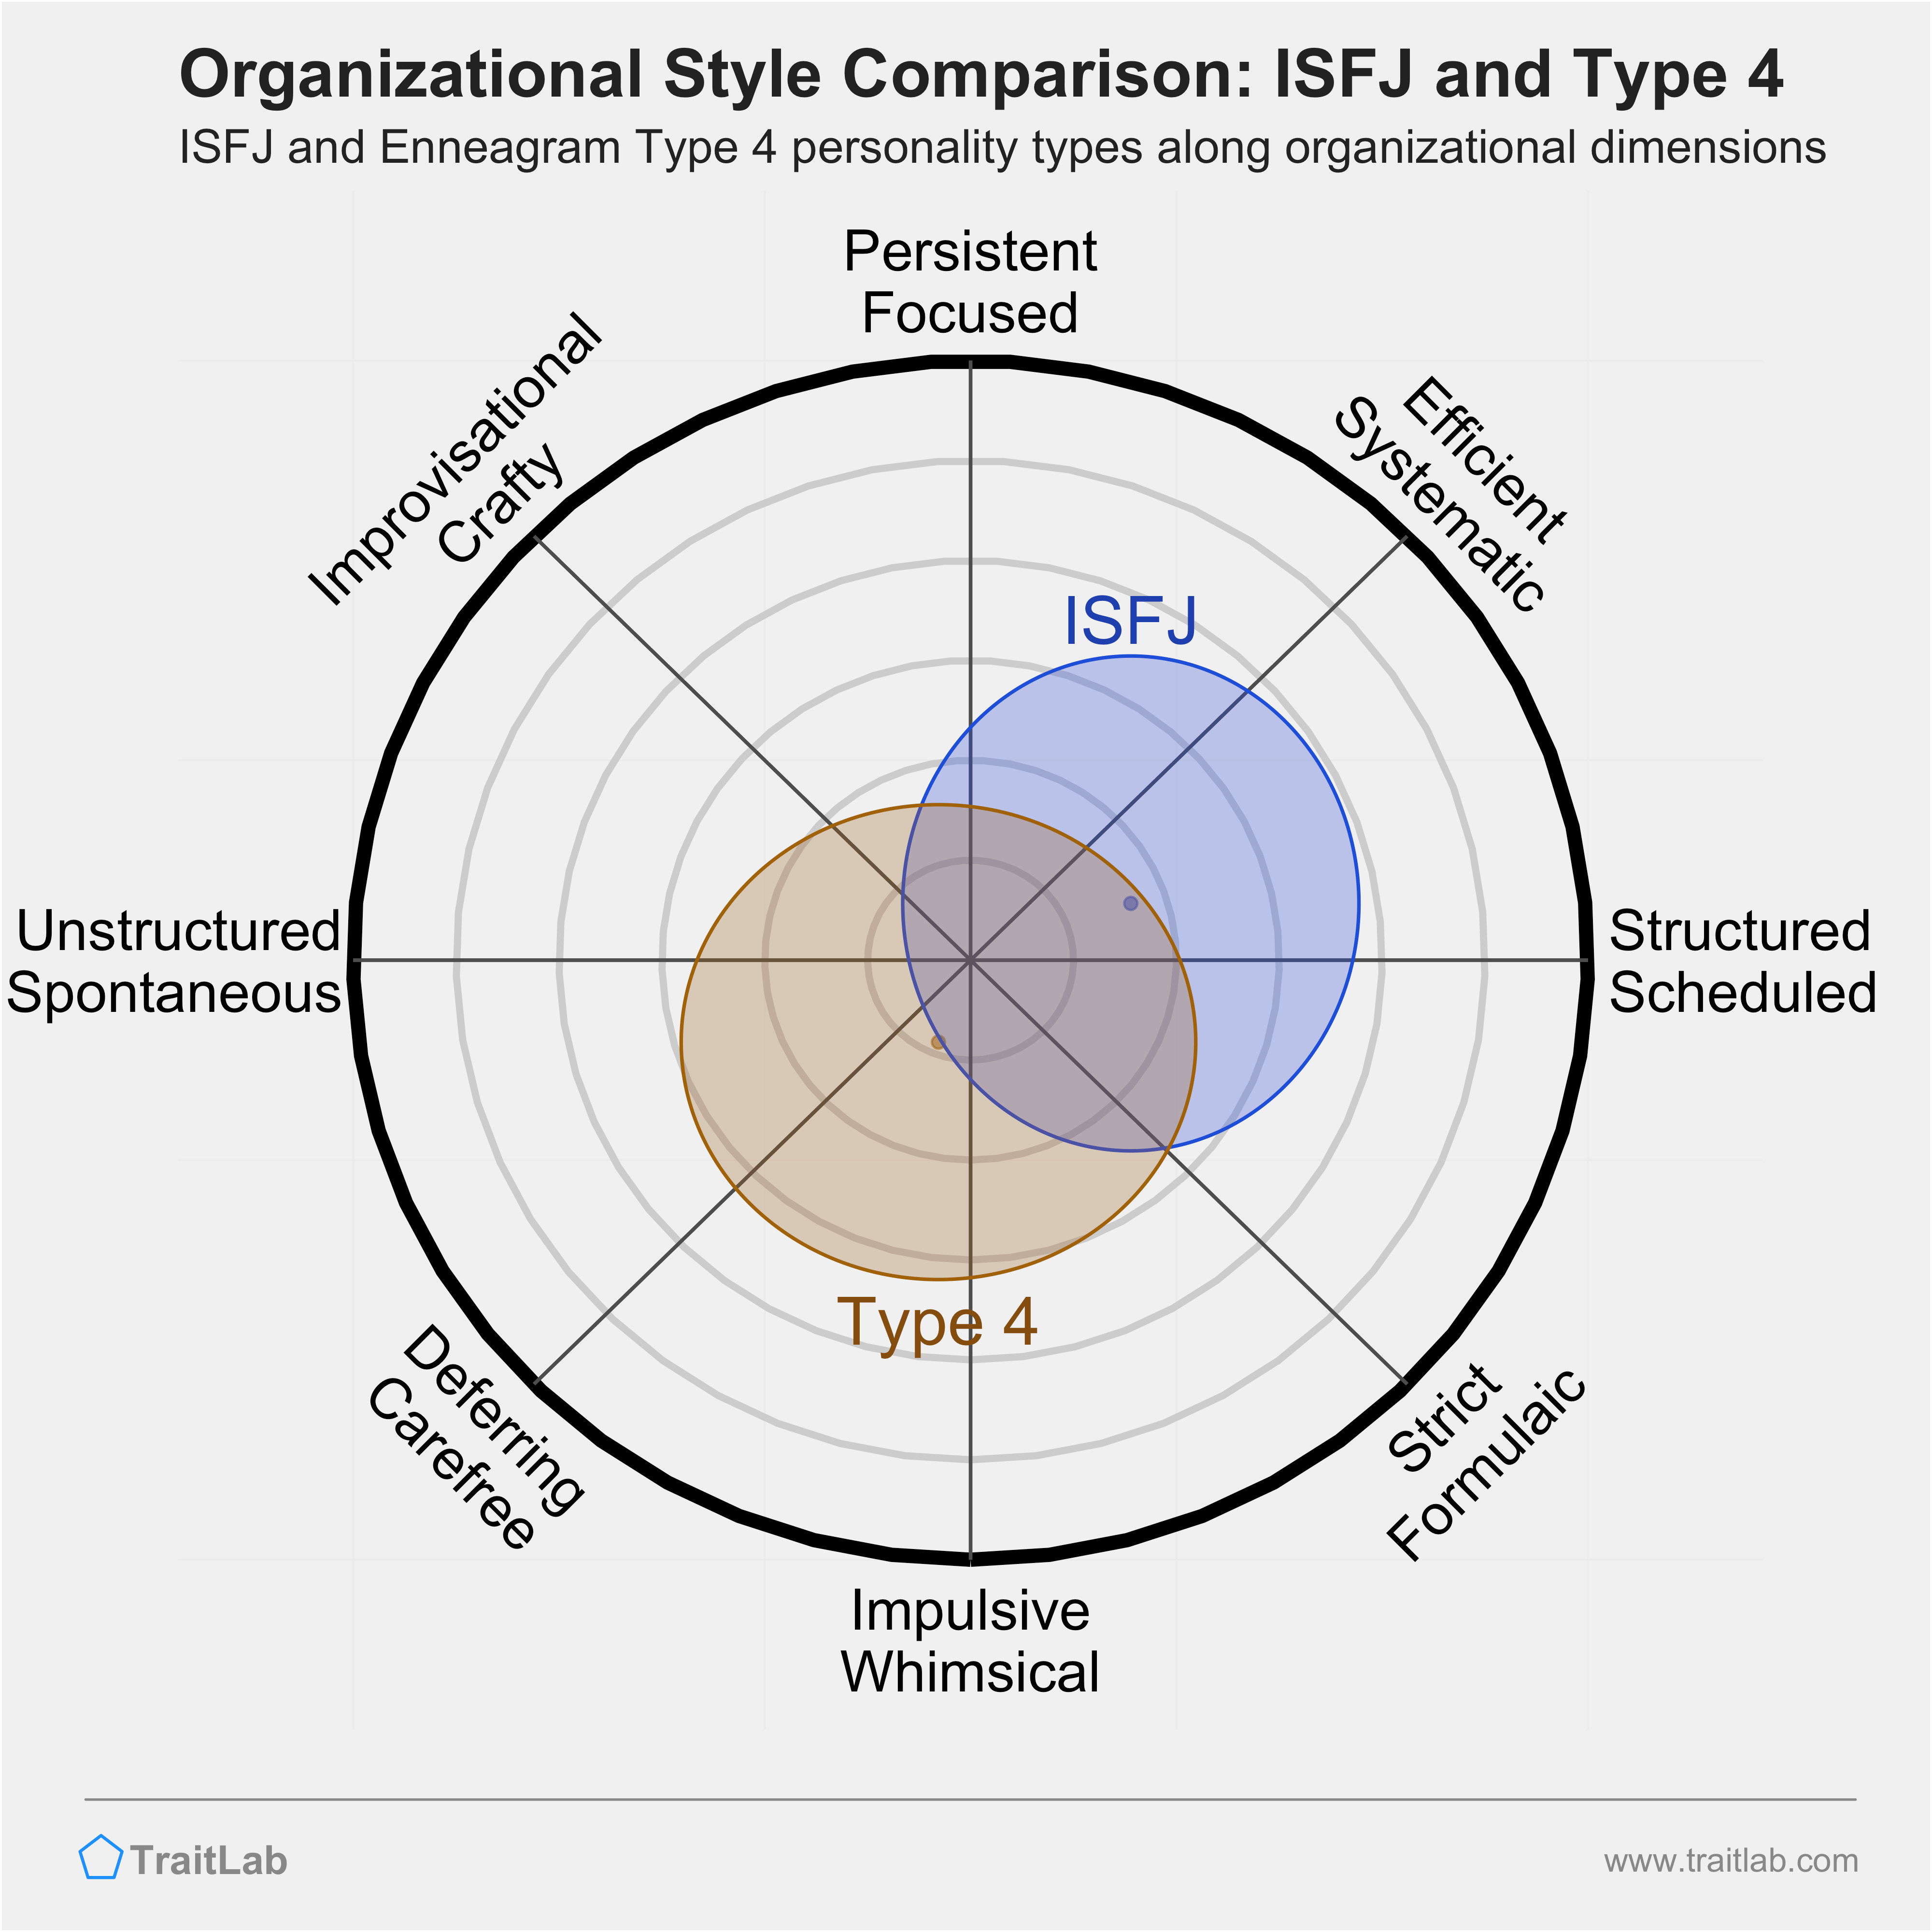 ISFJ and Type 4 comparison across organizational dimensions